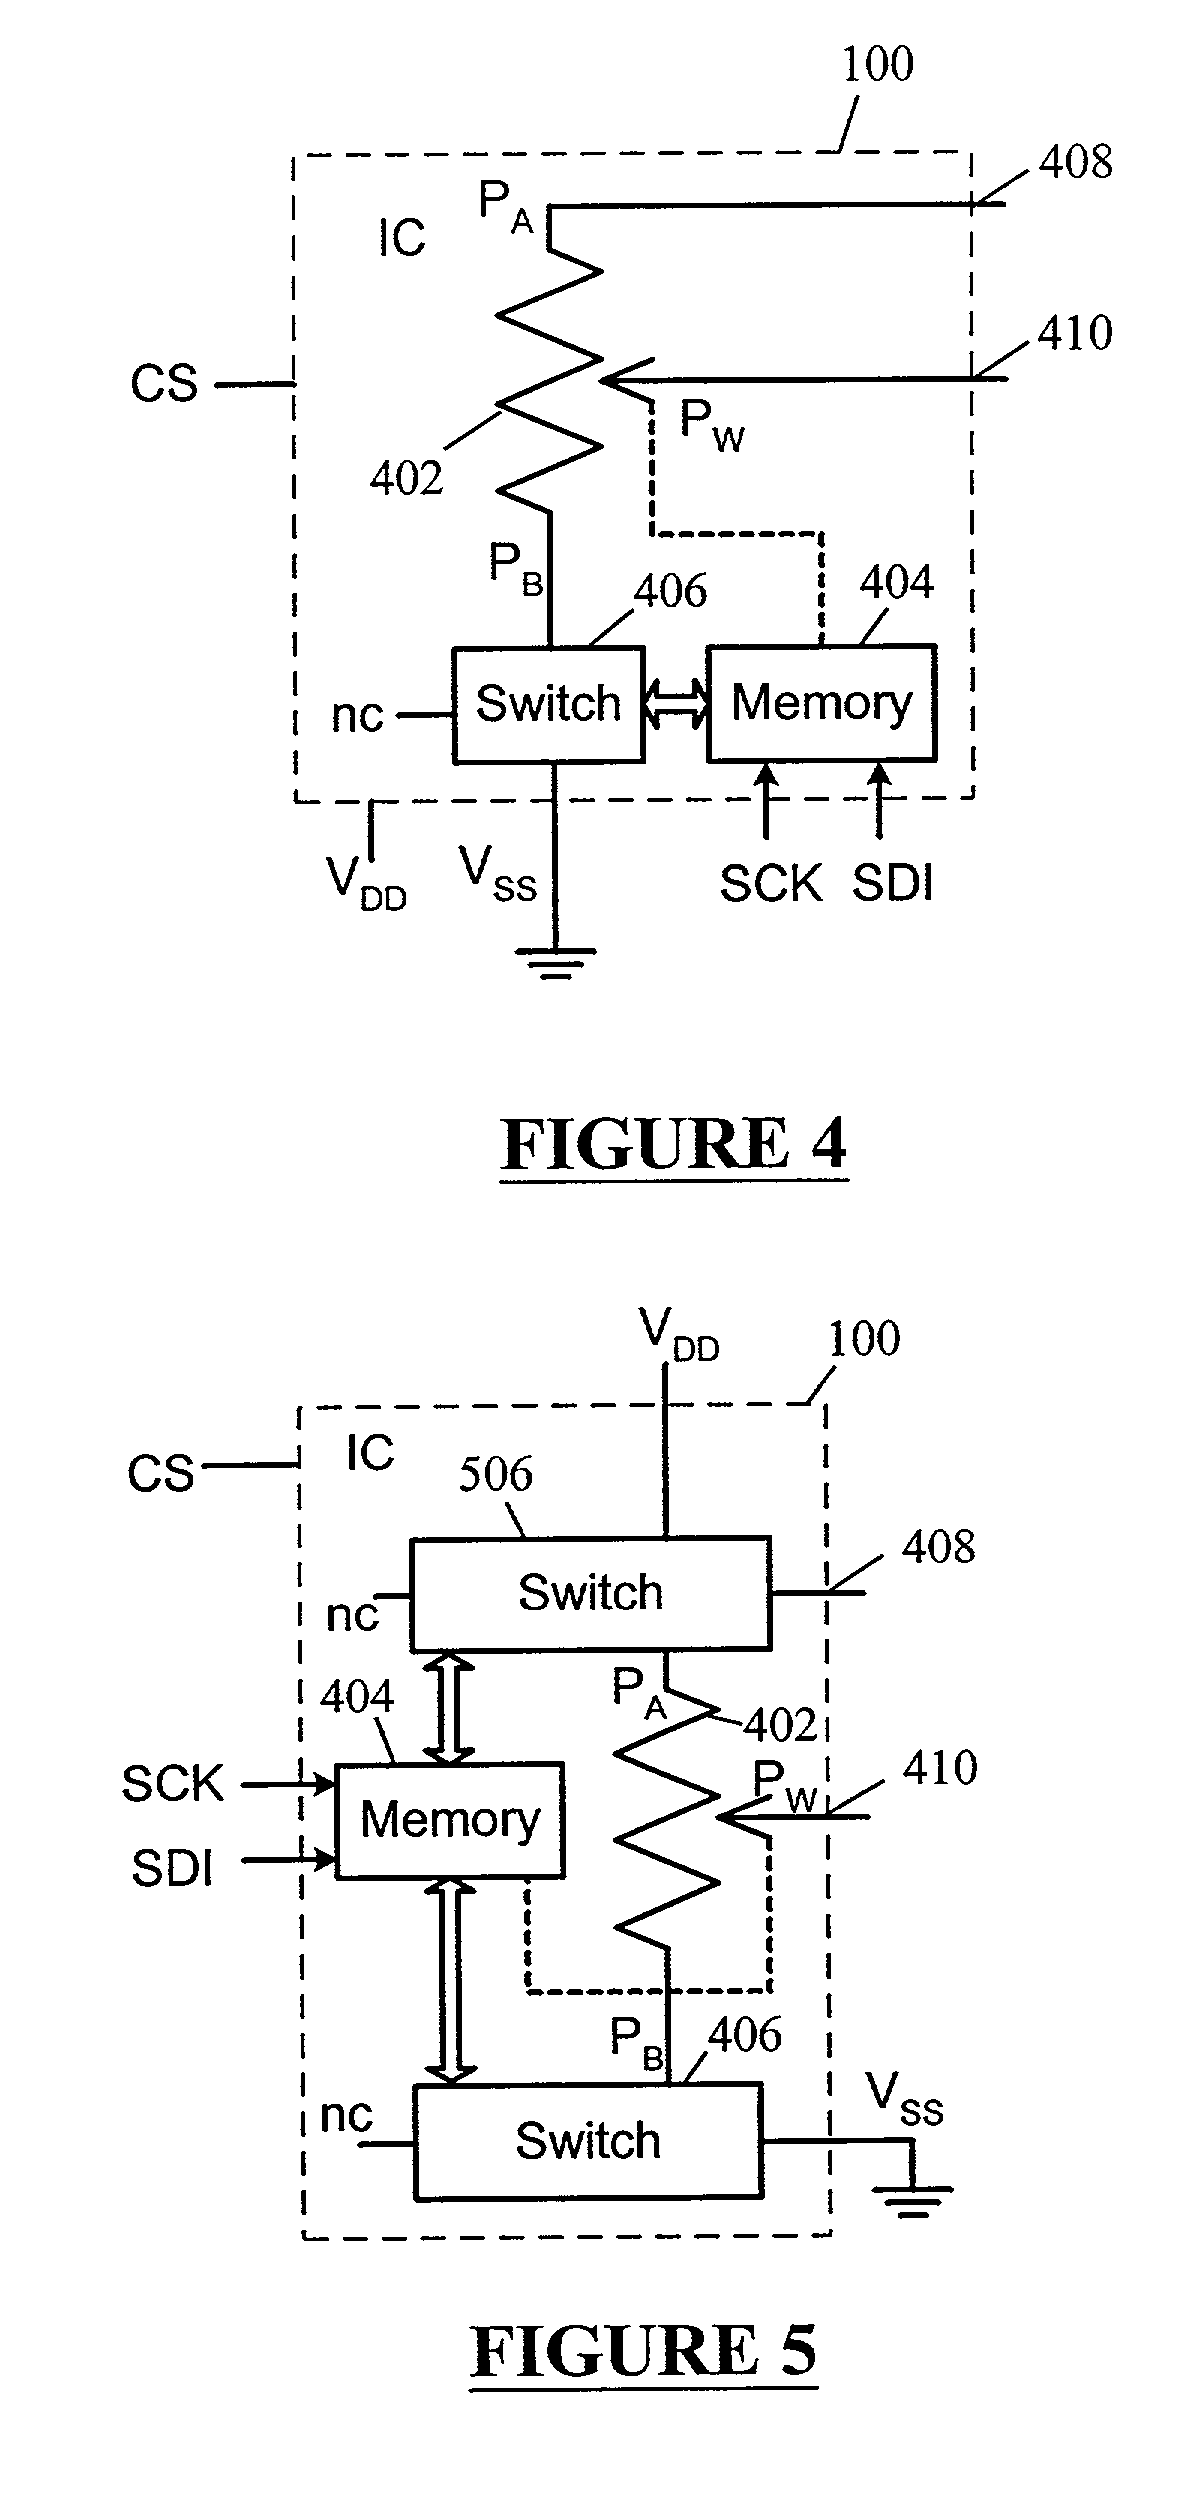 Apparatus and method for a two terminal implementation of rheostat and potentiometer modes in an integrated circuit